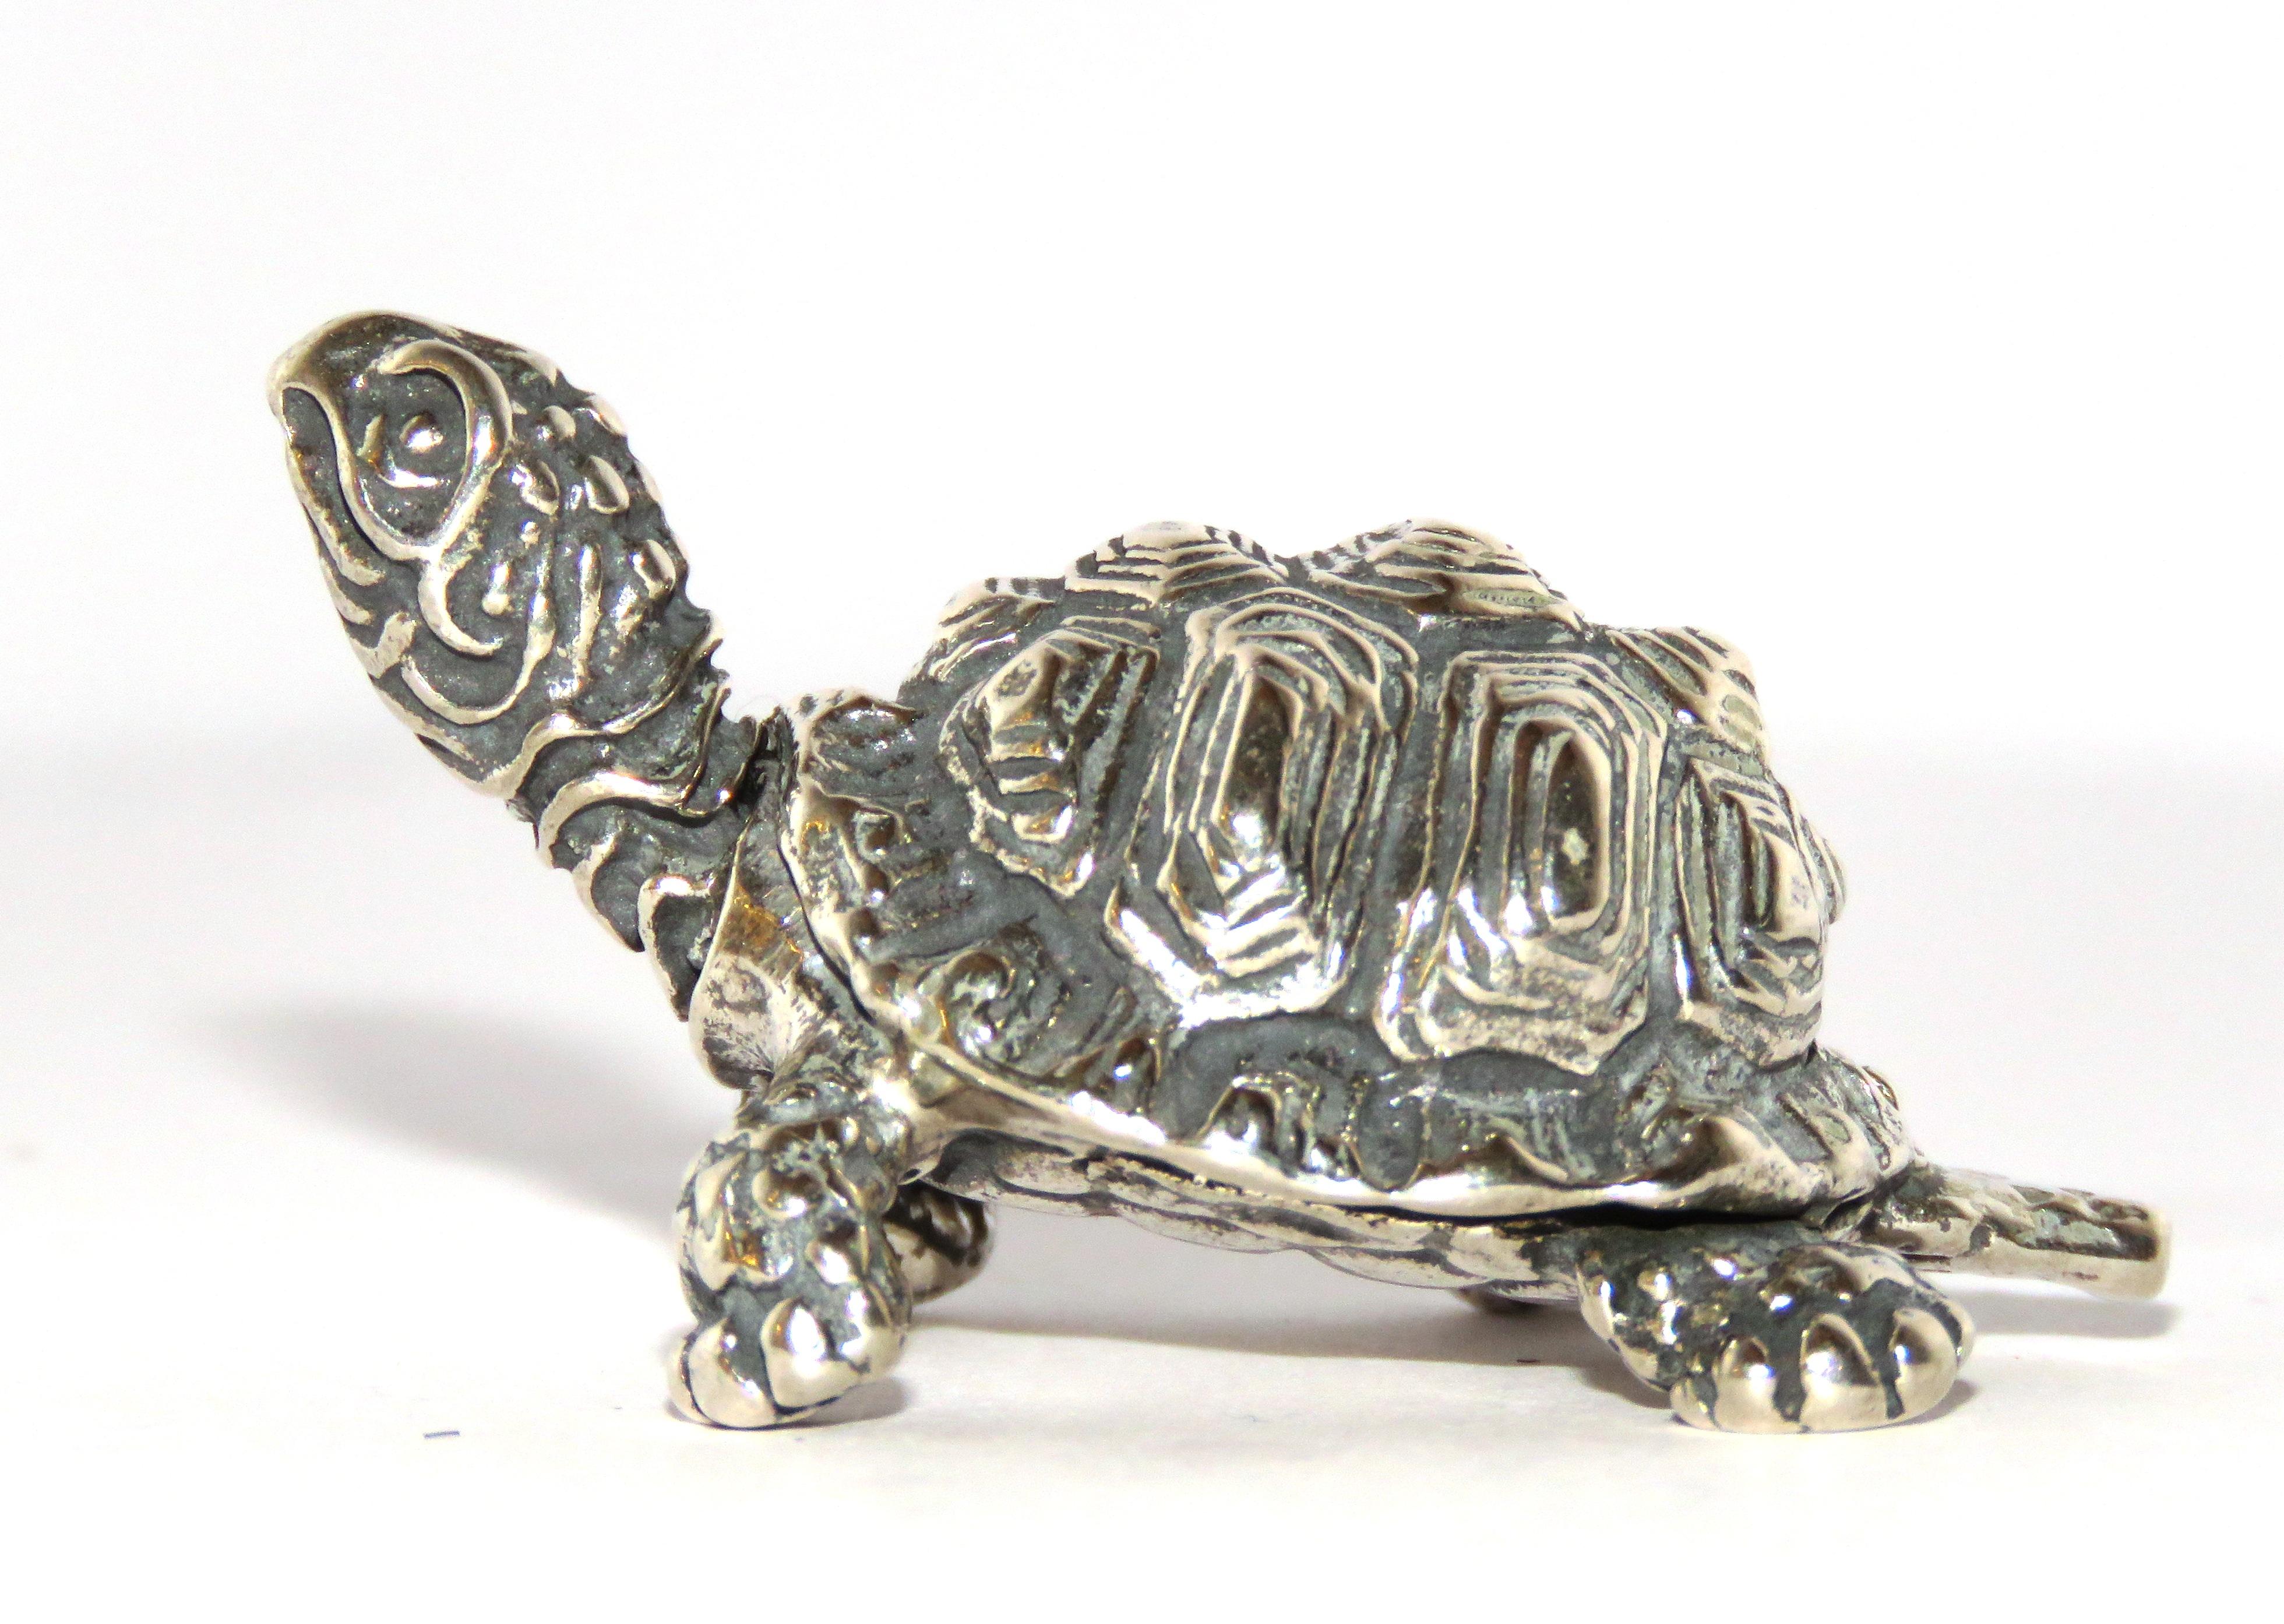 Solid silver turtle figurine, in very good vintage condition.
Dimensions: Height 30 mm / 1.18 inches - Length 50 mm / 1.96 inches - Weight 31 grams / 0.99 troy ounces
It  is stamped with the Silver Italian Mark 800 - 181VA - UGHETTI FRANCO VARESE